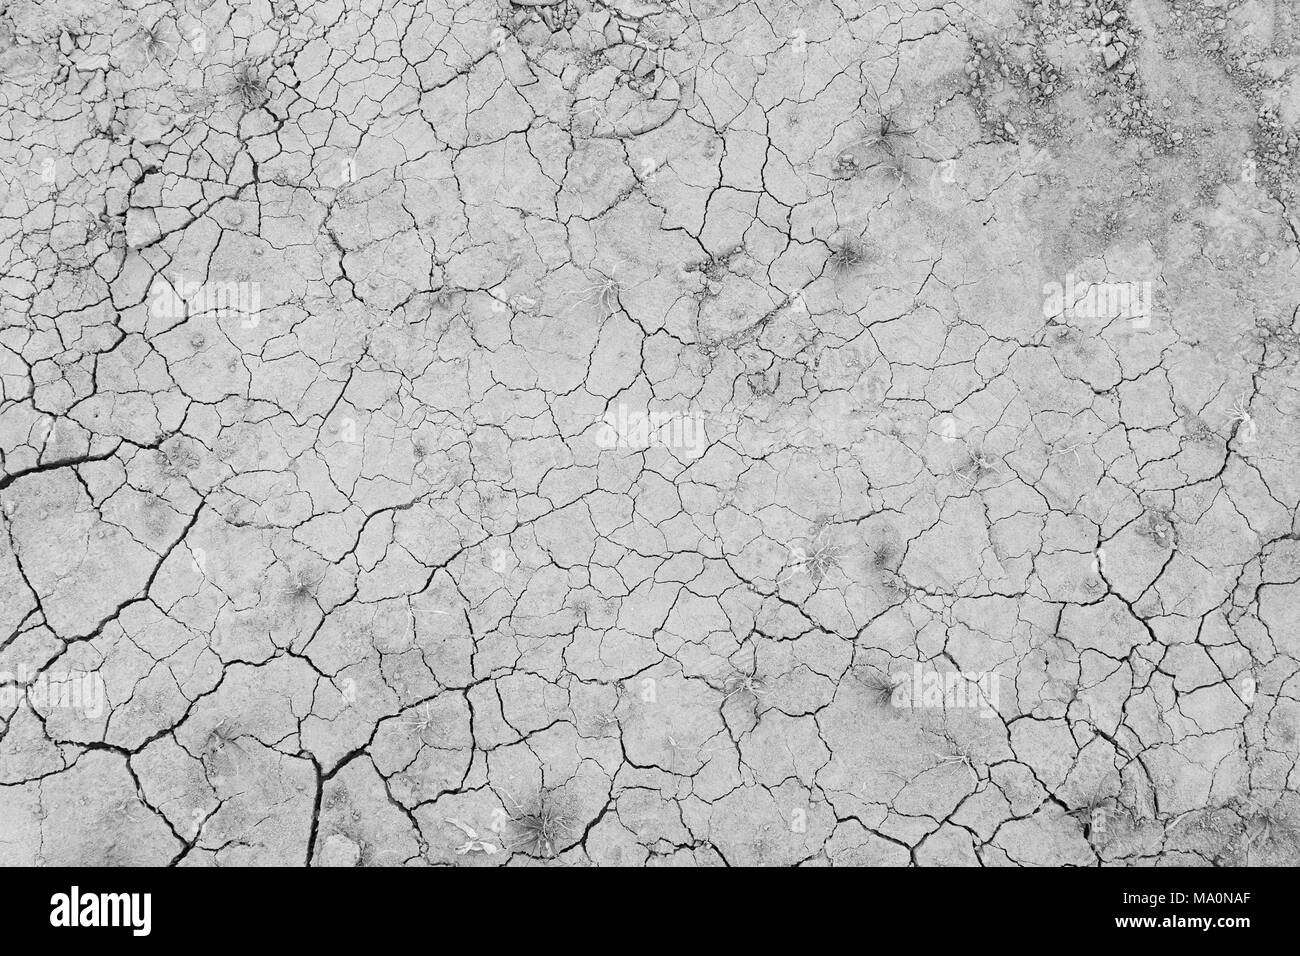 Dry and cracked soil ground during drought, viewed from above in black and white. Stock Photo